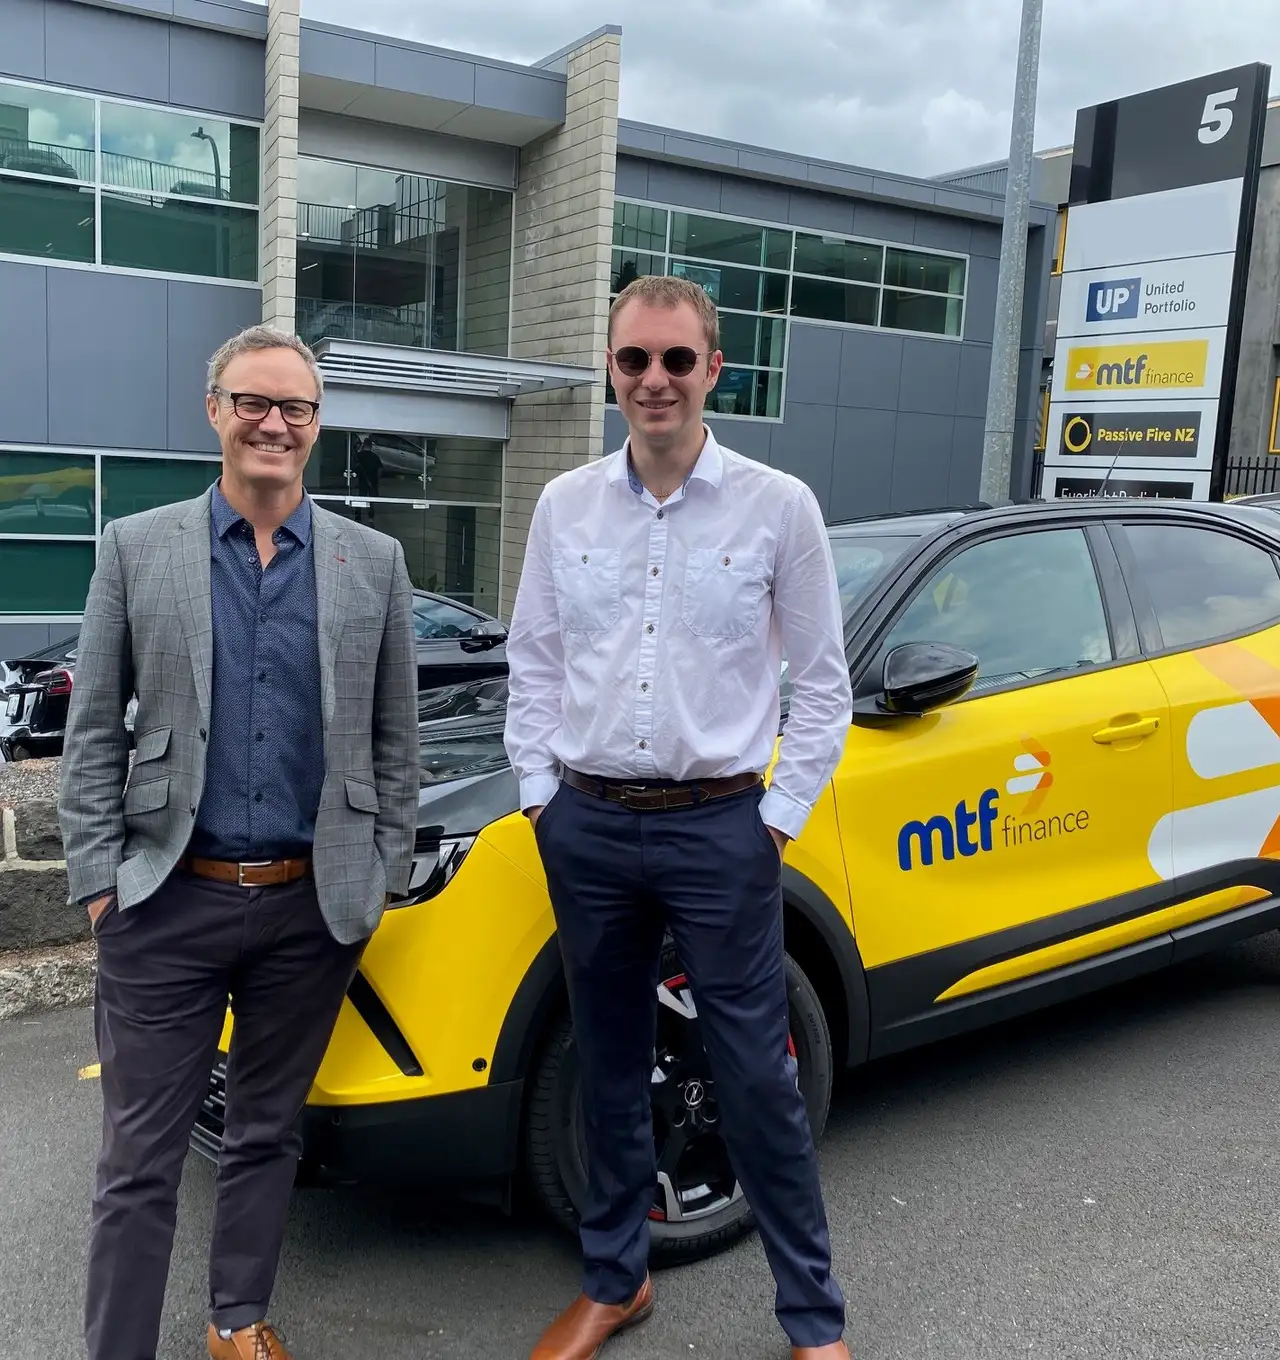 Two men standing in front of a yellow MTF Finance branded car